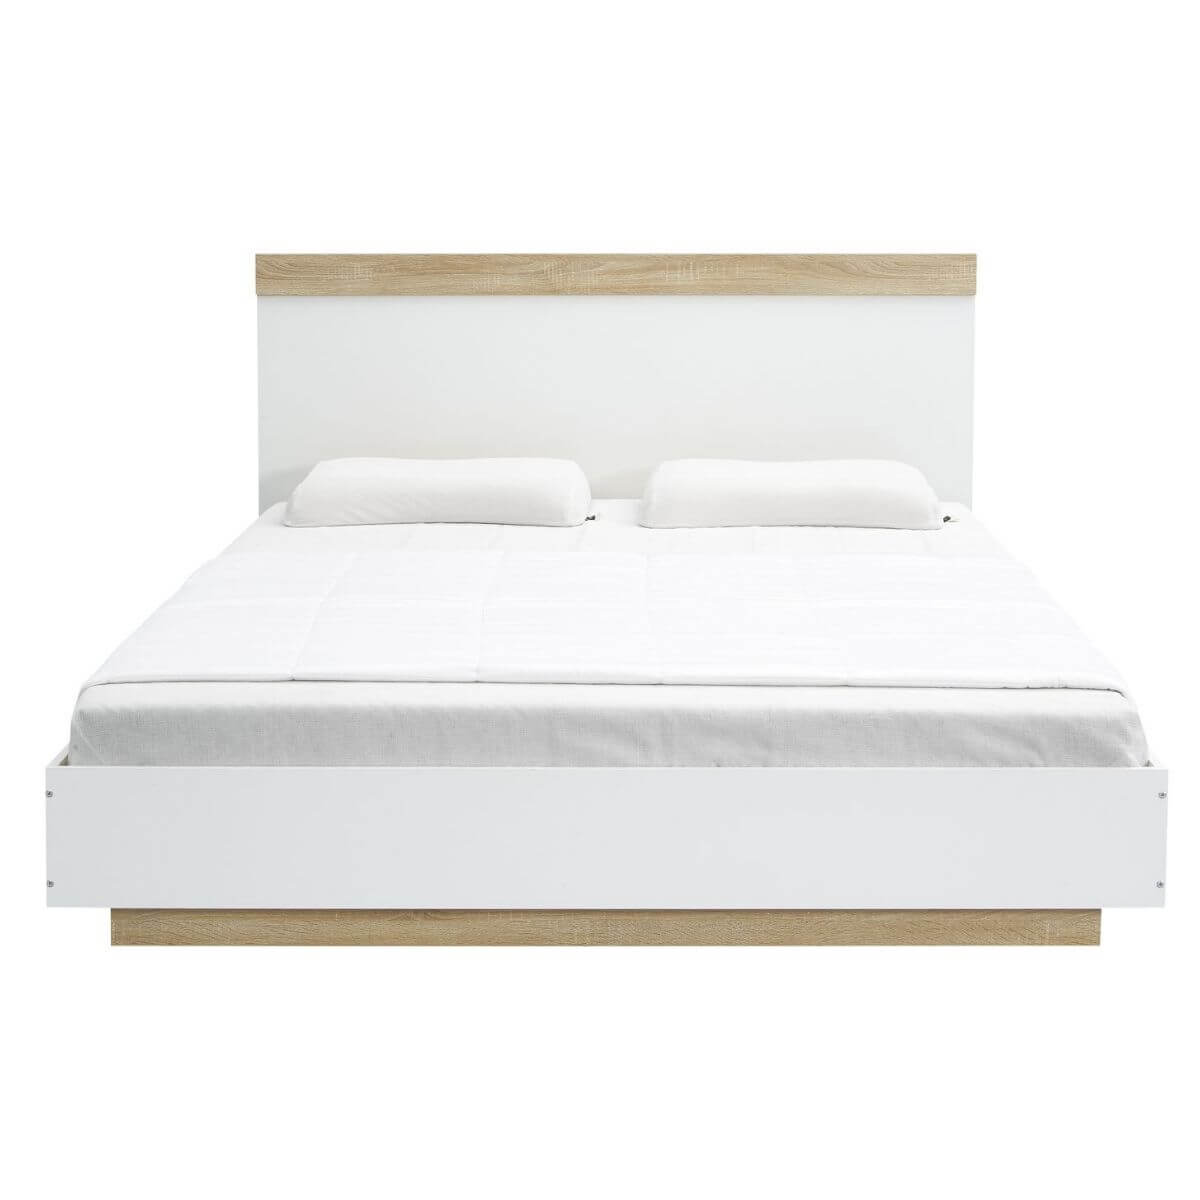 Aiden Industrial Contemporary White Oak Bed Frame King Size - ozily